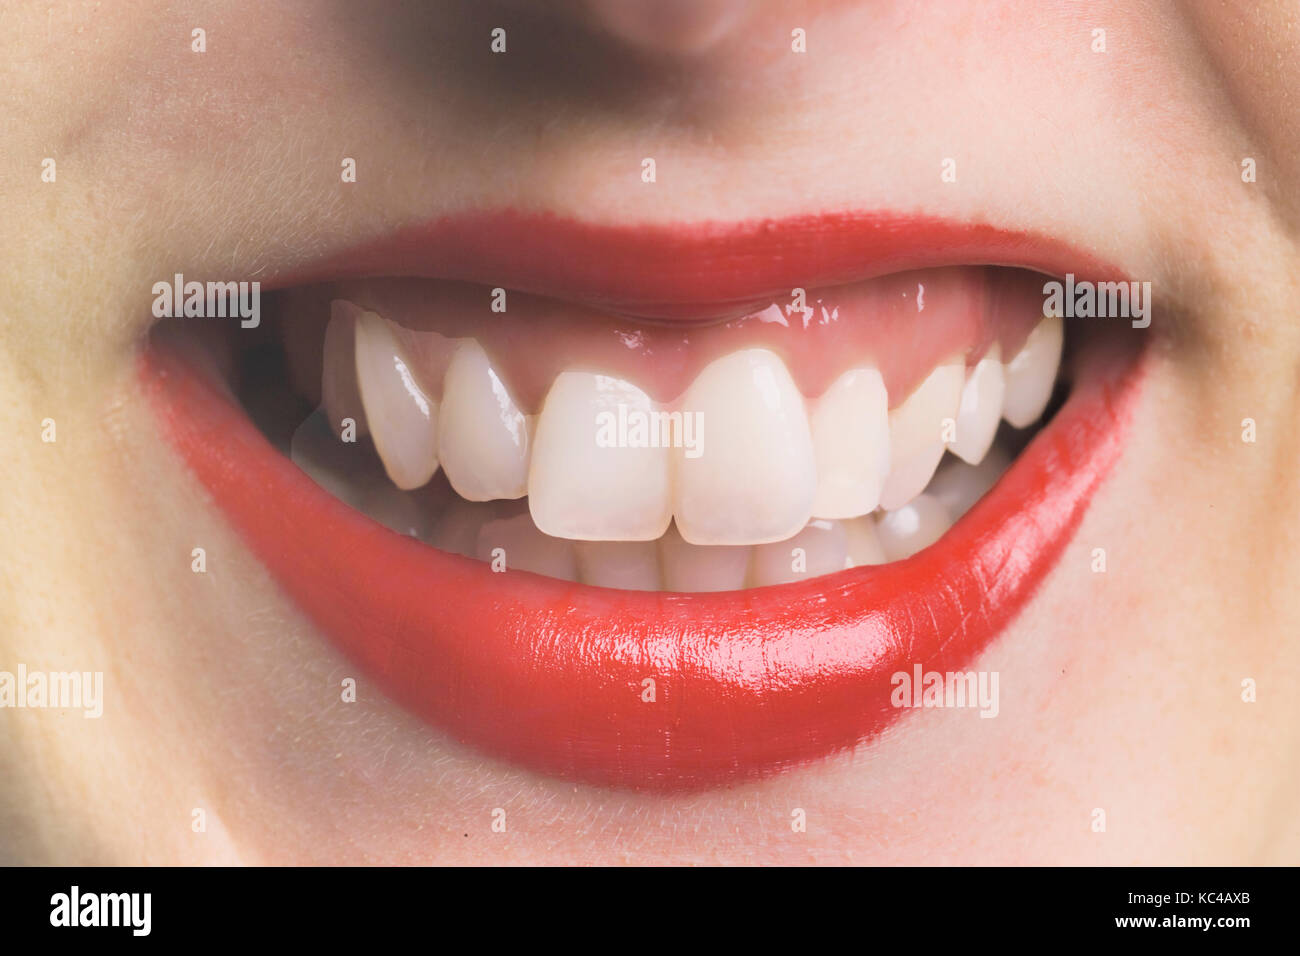 Smiling mouth of a woman using lipstick made from wax derived from wheat-straw, in an experimental environmentally-friendly process piloted at York Un Stock Photo